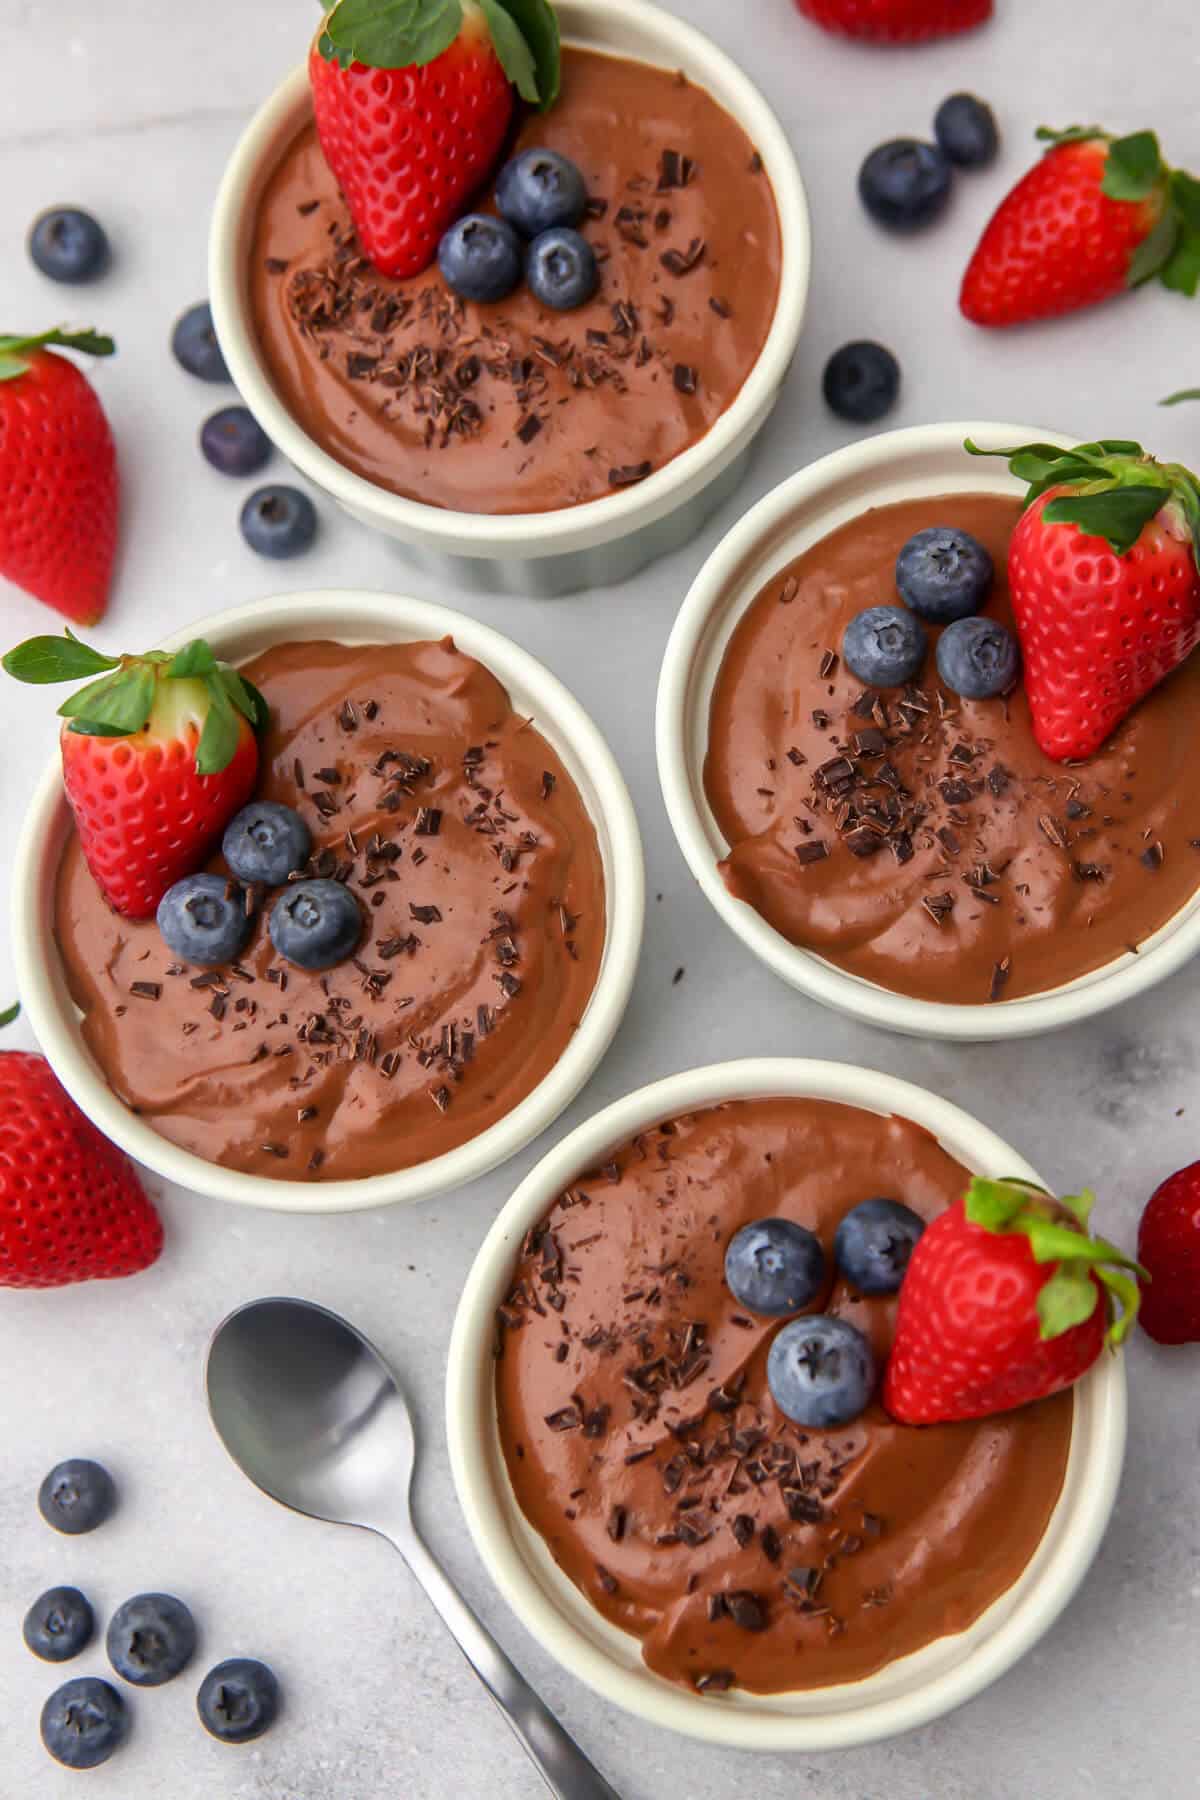 A top view of 4 ramekins of silken tofu chocolate mousse with berries on top.